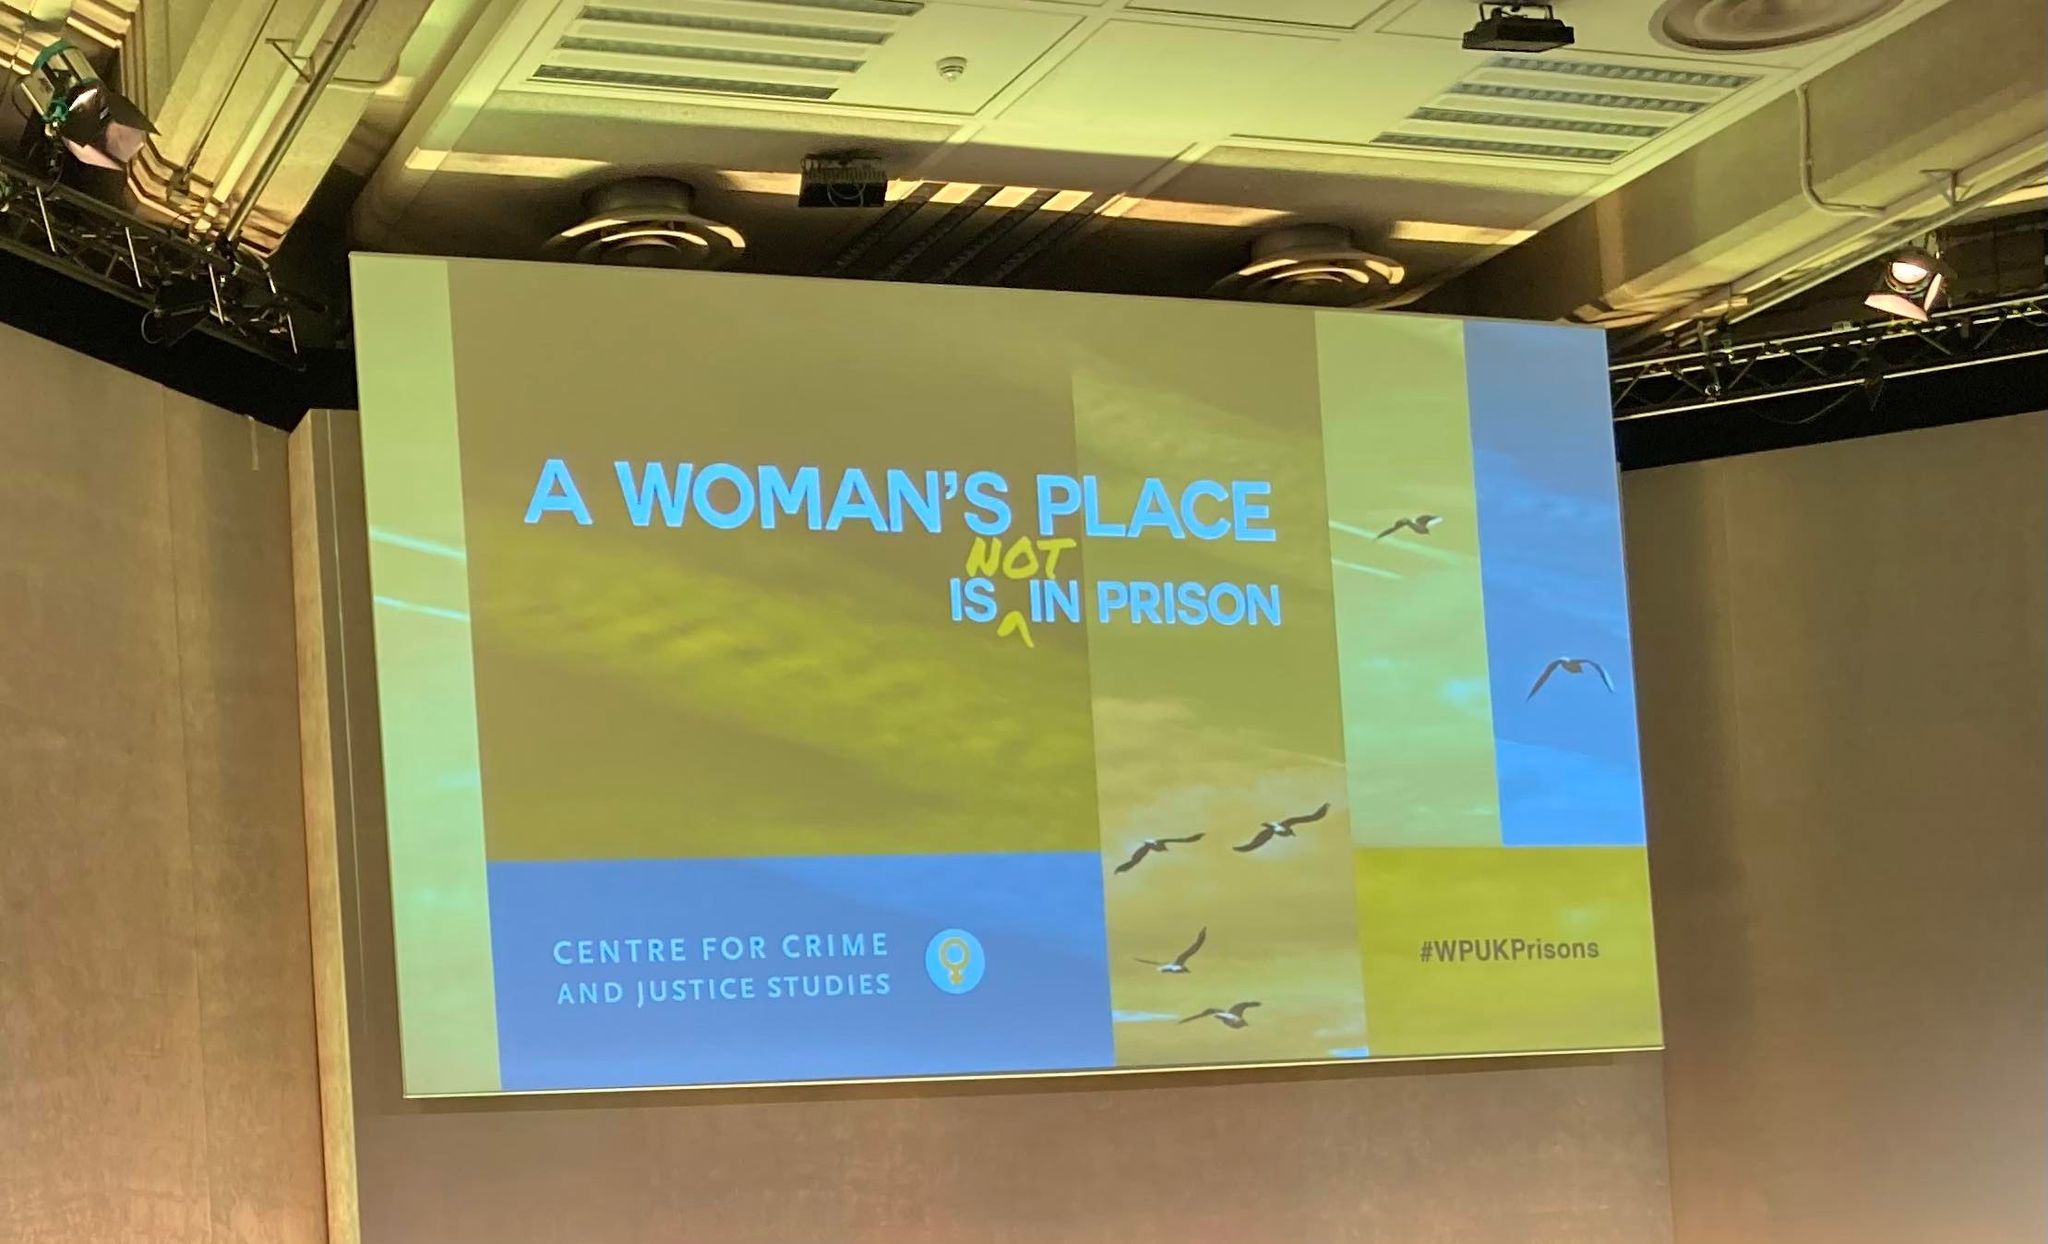 Photo shows screen above stage at #WPUKPrisons meeting - A Woman's Place is not in prison - shades of yellow, grey